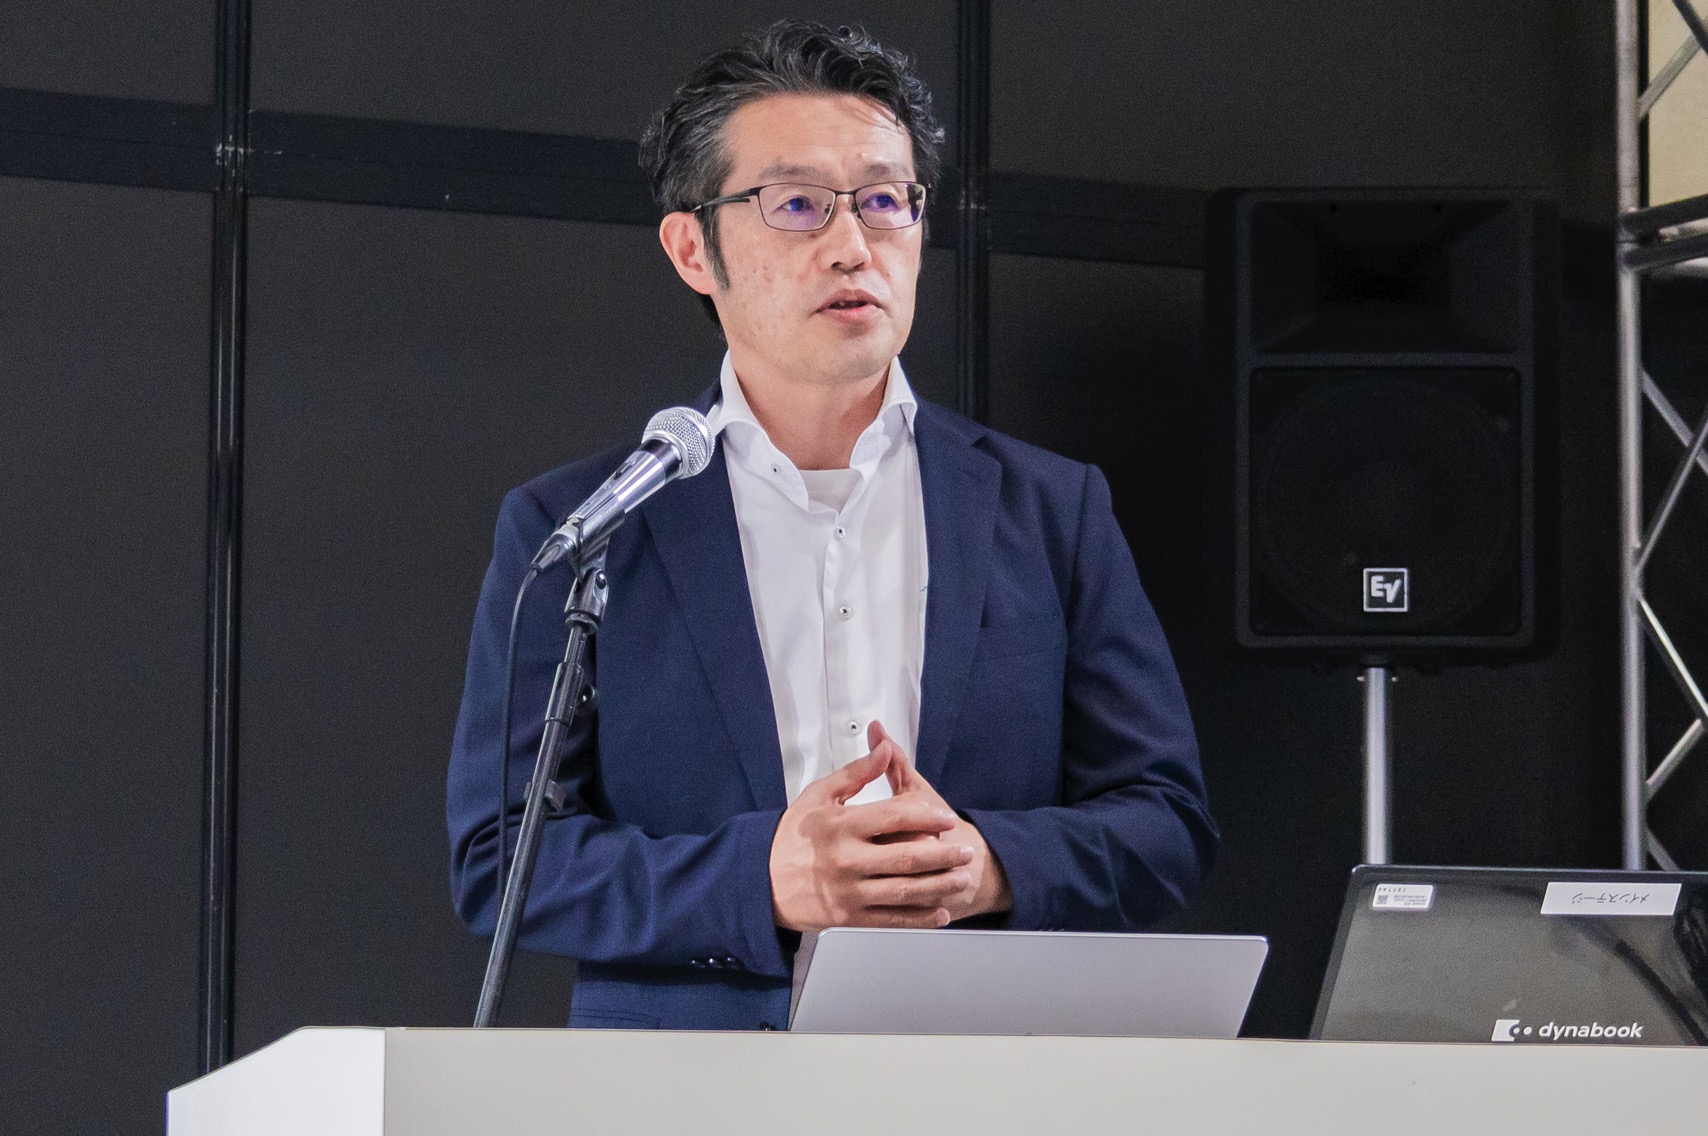 Koji gave a talk for the My-IoT project at smart factory Japan 2022.